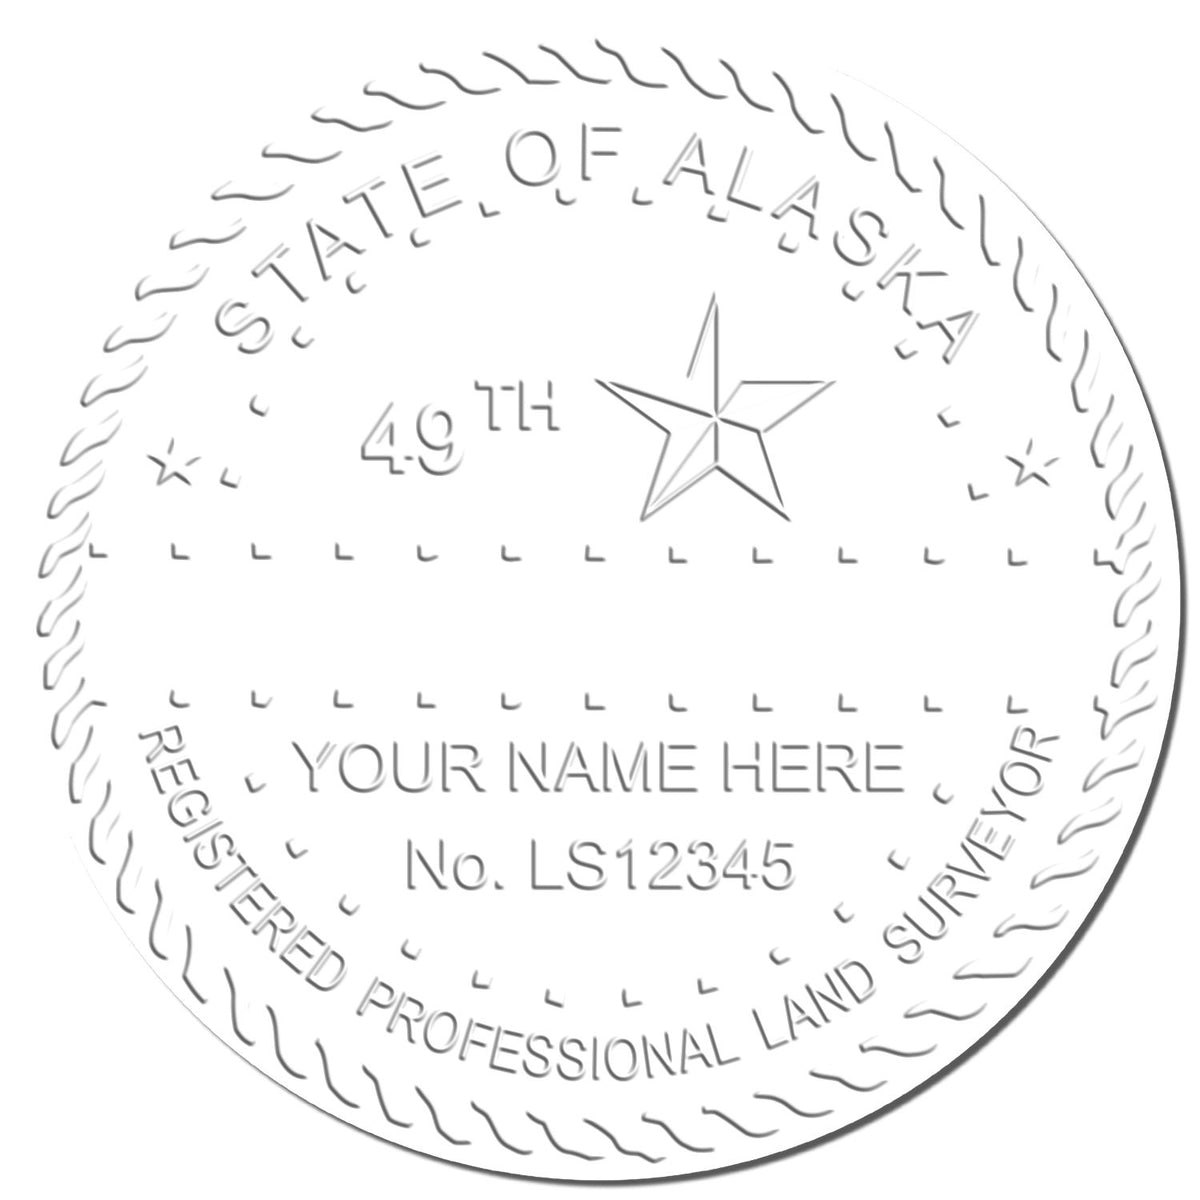 This paper is stamped with a sample imprint of the Gift Alaska Land Surveyor Seal, signifying its quality and reliability.